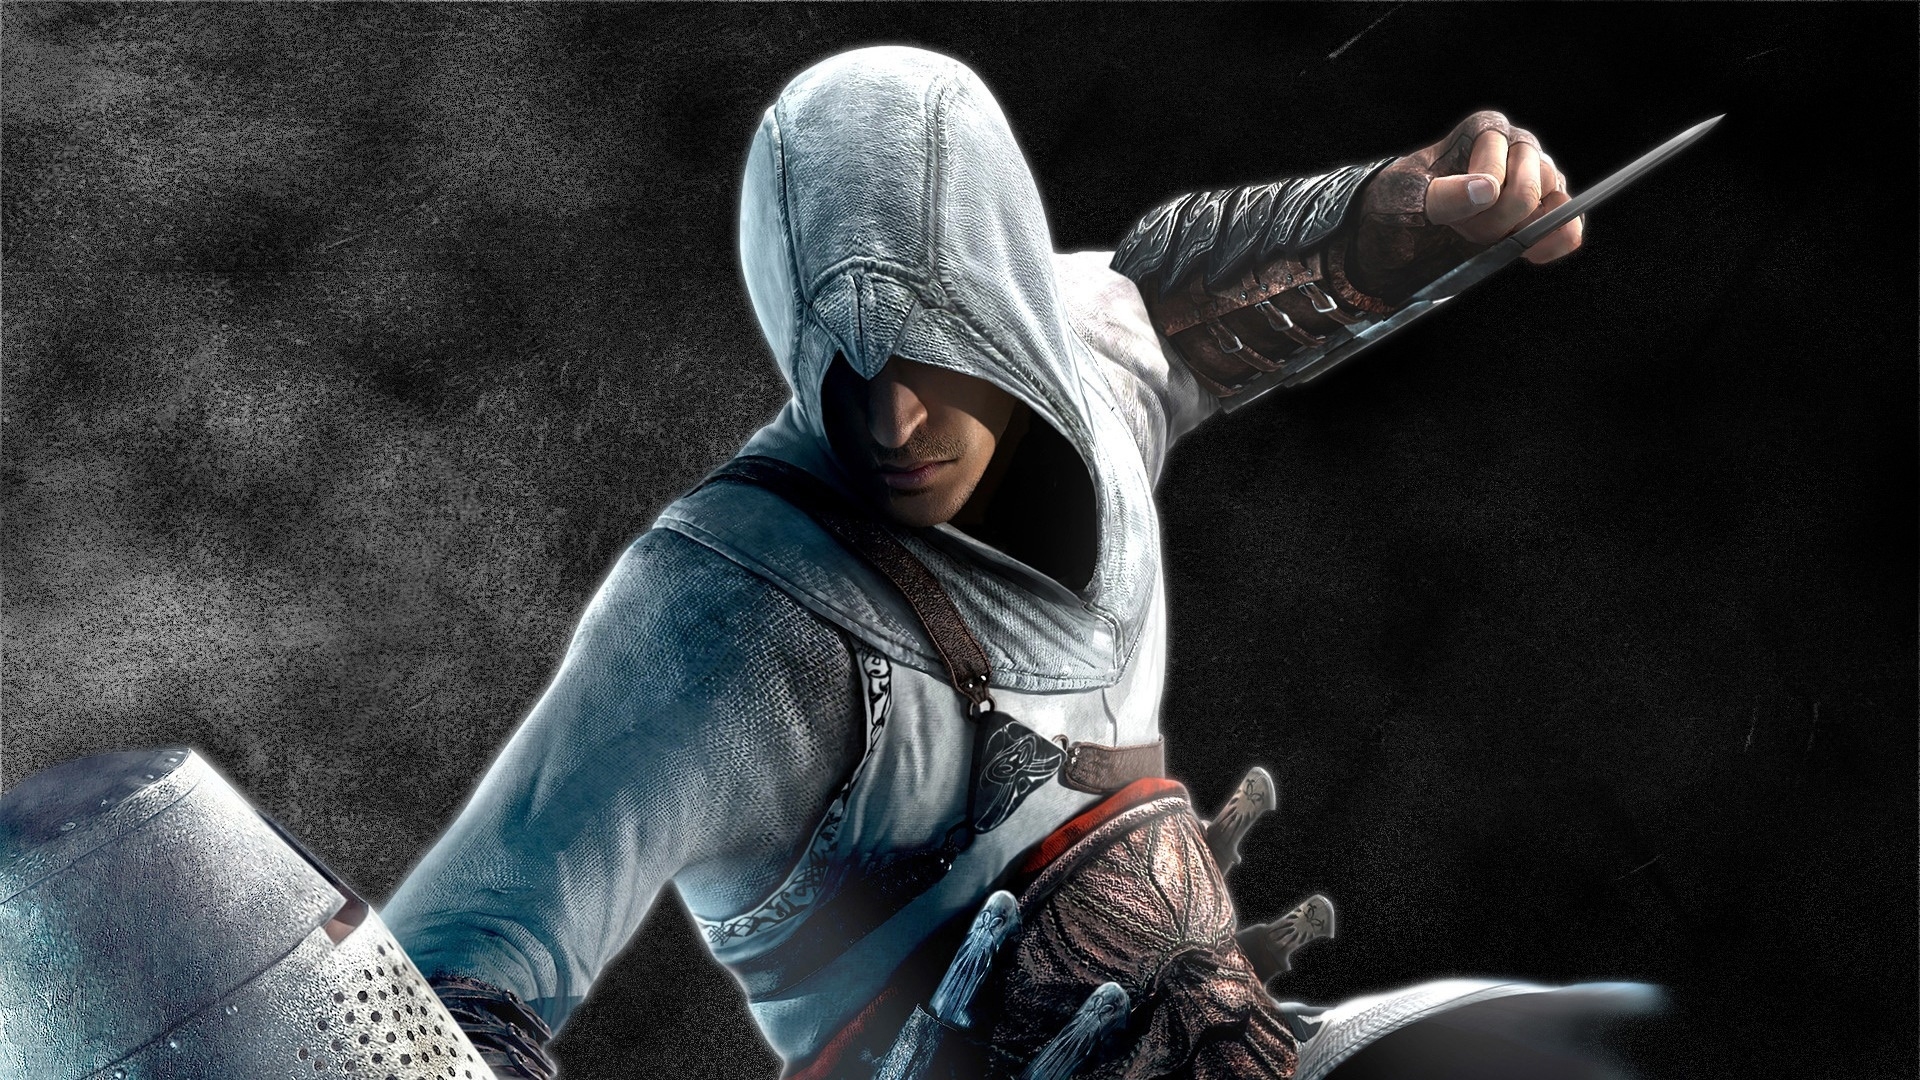 Assassin Creed for 1920 x 1080 HDTV 1080p resolution